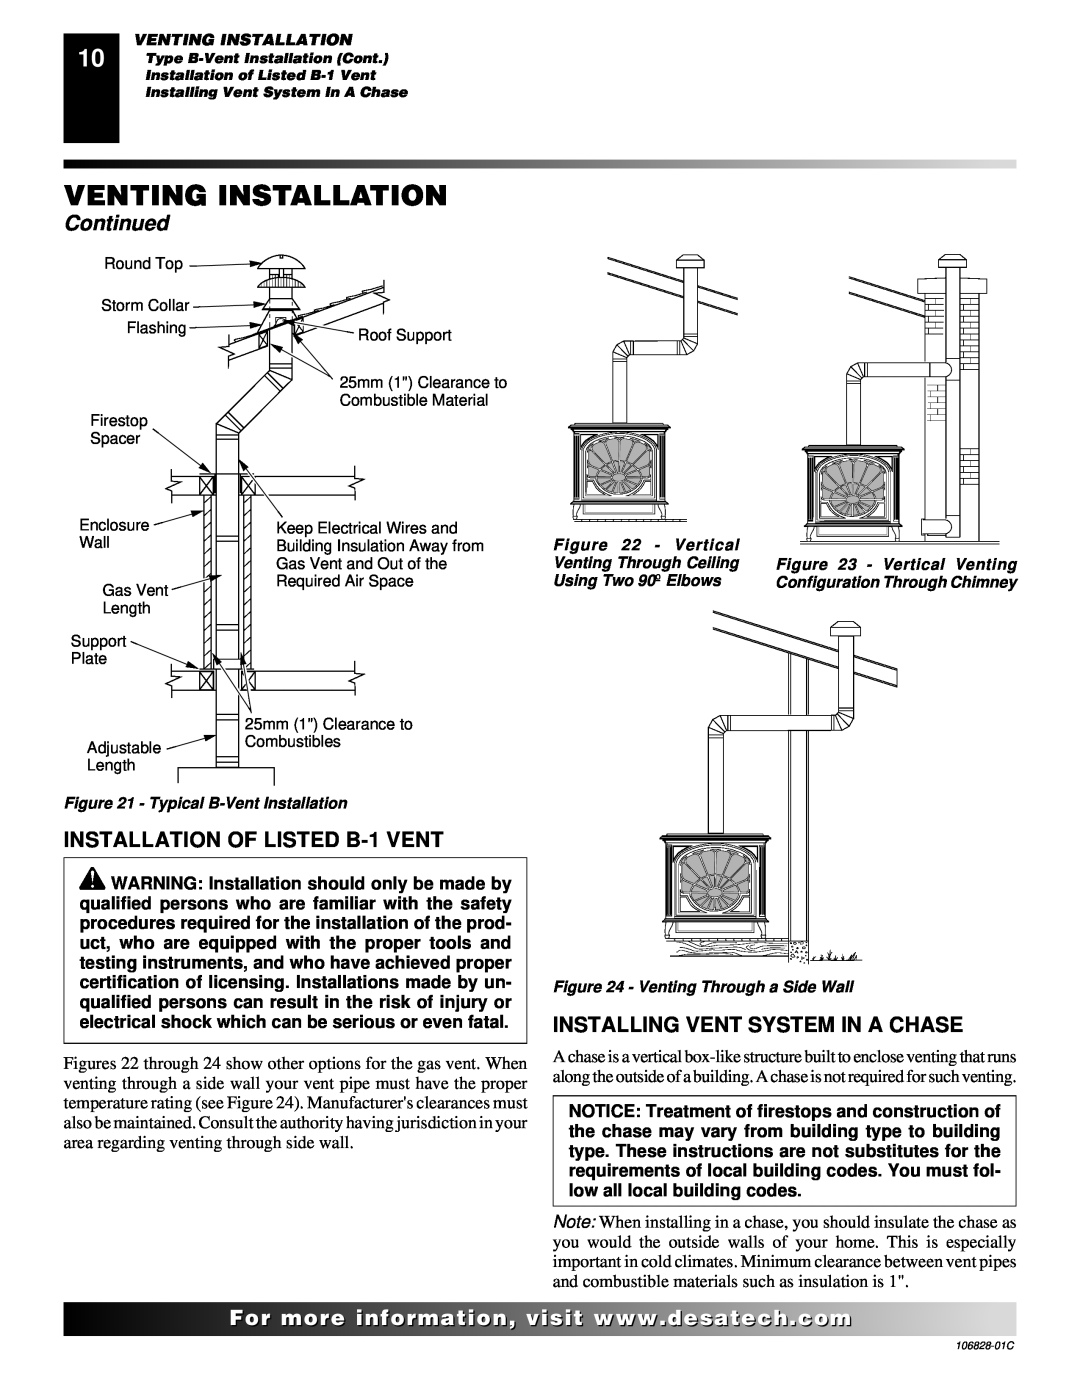 Desa SBVBN(C) INSTALLATION OF LISTED B-1 VENT, Installing Vent System In A Chase, Venting Installation, Continued 